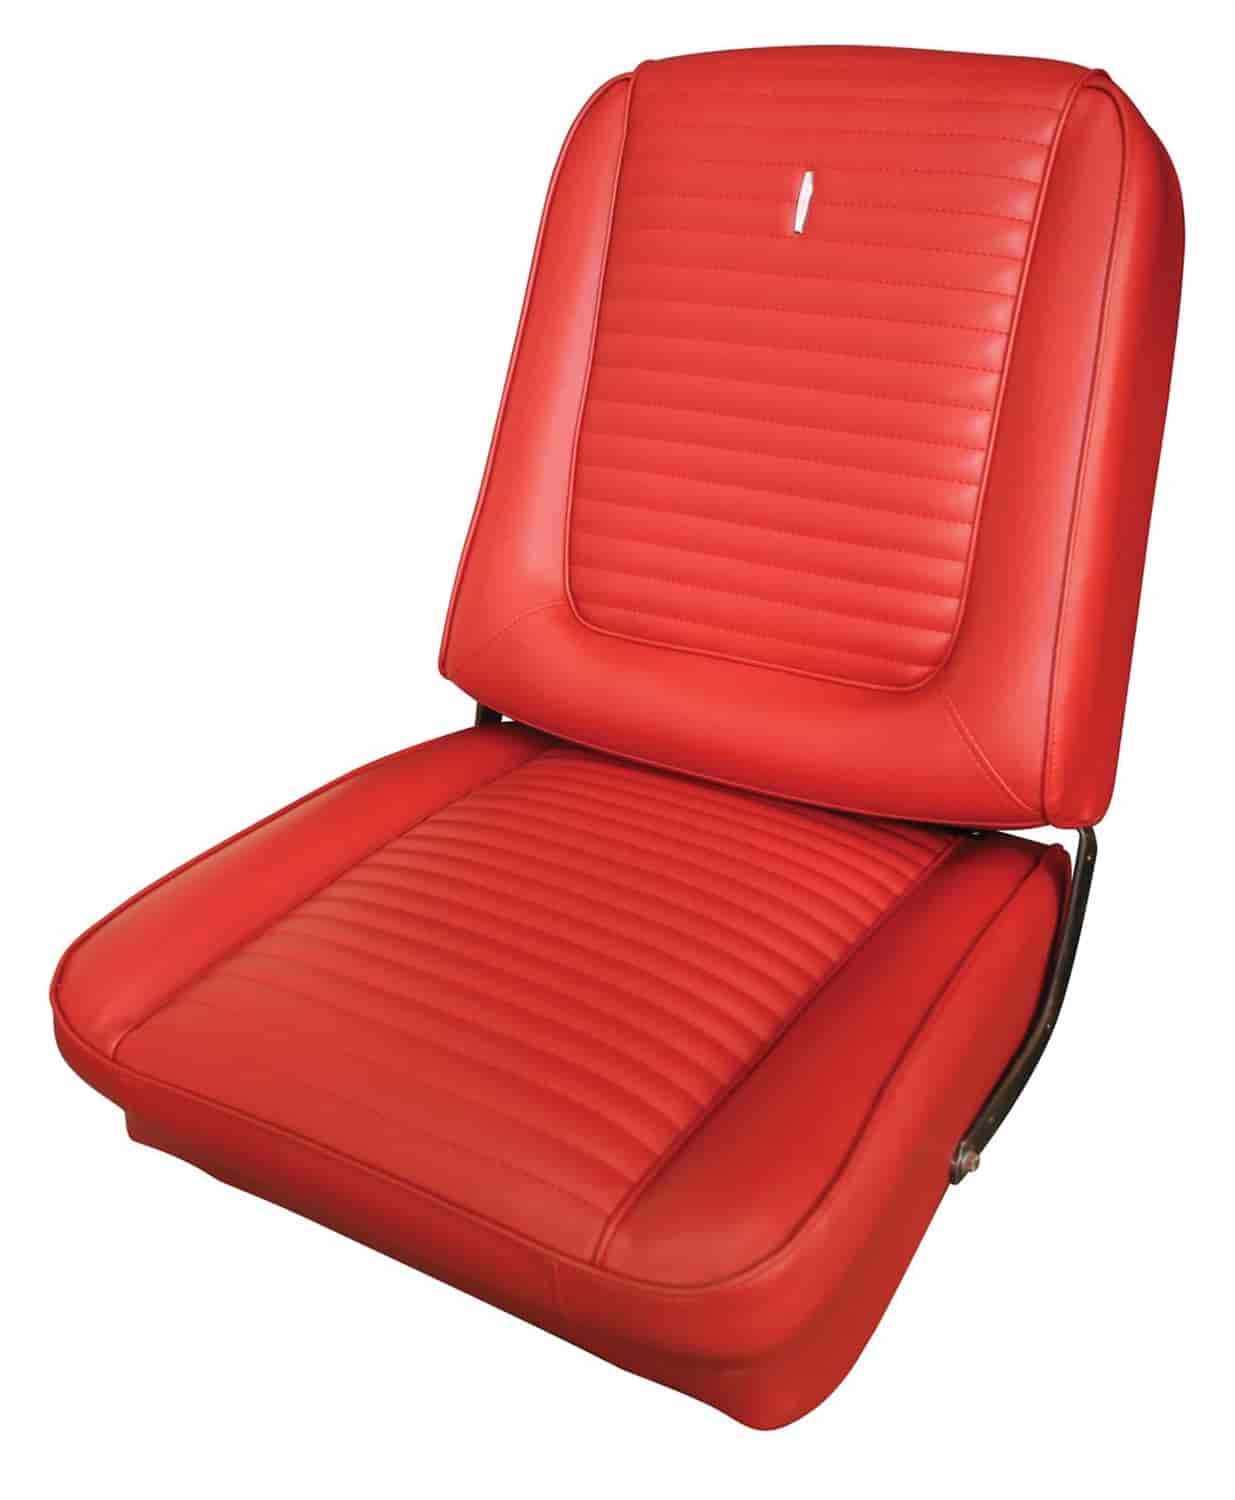 1965 Ford Falcon Futura 4-Door and Station Wagon Interior Front Bench Seat Upholstery Set